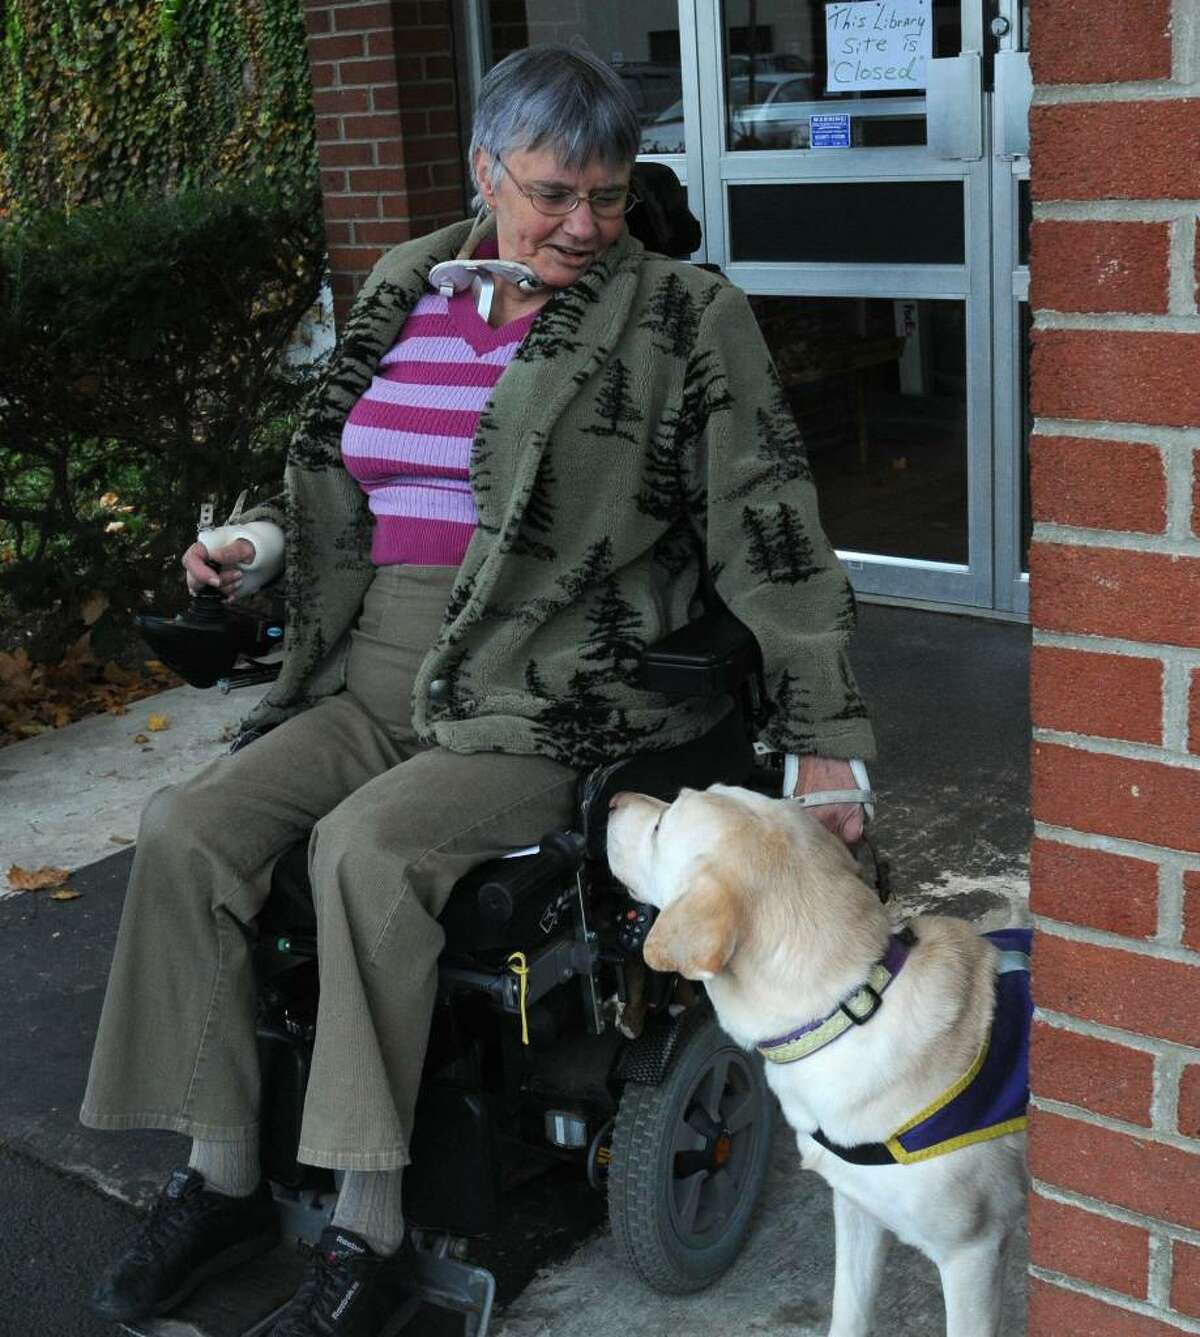 Fritz Smith of Colonie sits outside of the Elks Lodge on South Allen Street in Albany on Nov. 4, 2009. Fritz couldn't attend the meeting inside because the facility has no ramps for her wheelchair. She wanted to attend the meeting inside about the closing of the post offices in the Pine Hills and Delaware Ave. She lives in Colonie but the Pine Hills Post Office is wheelchair accessible. (Lori Van Buren / Times Union)